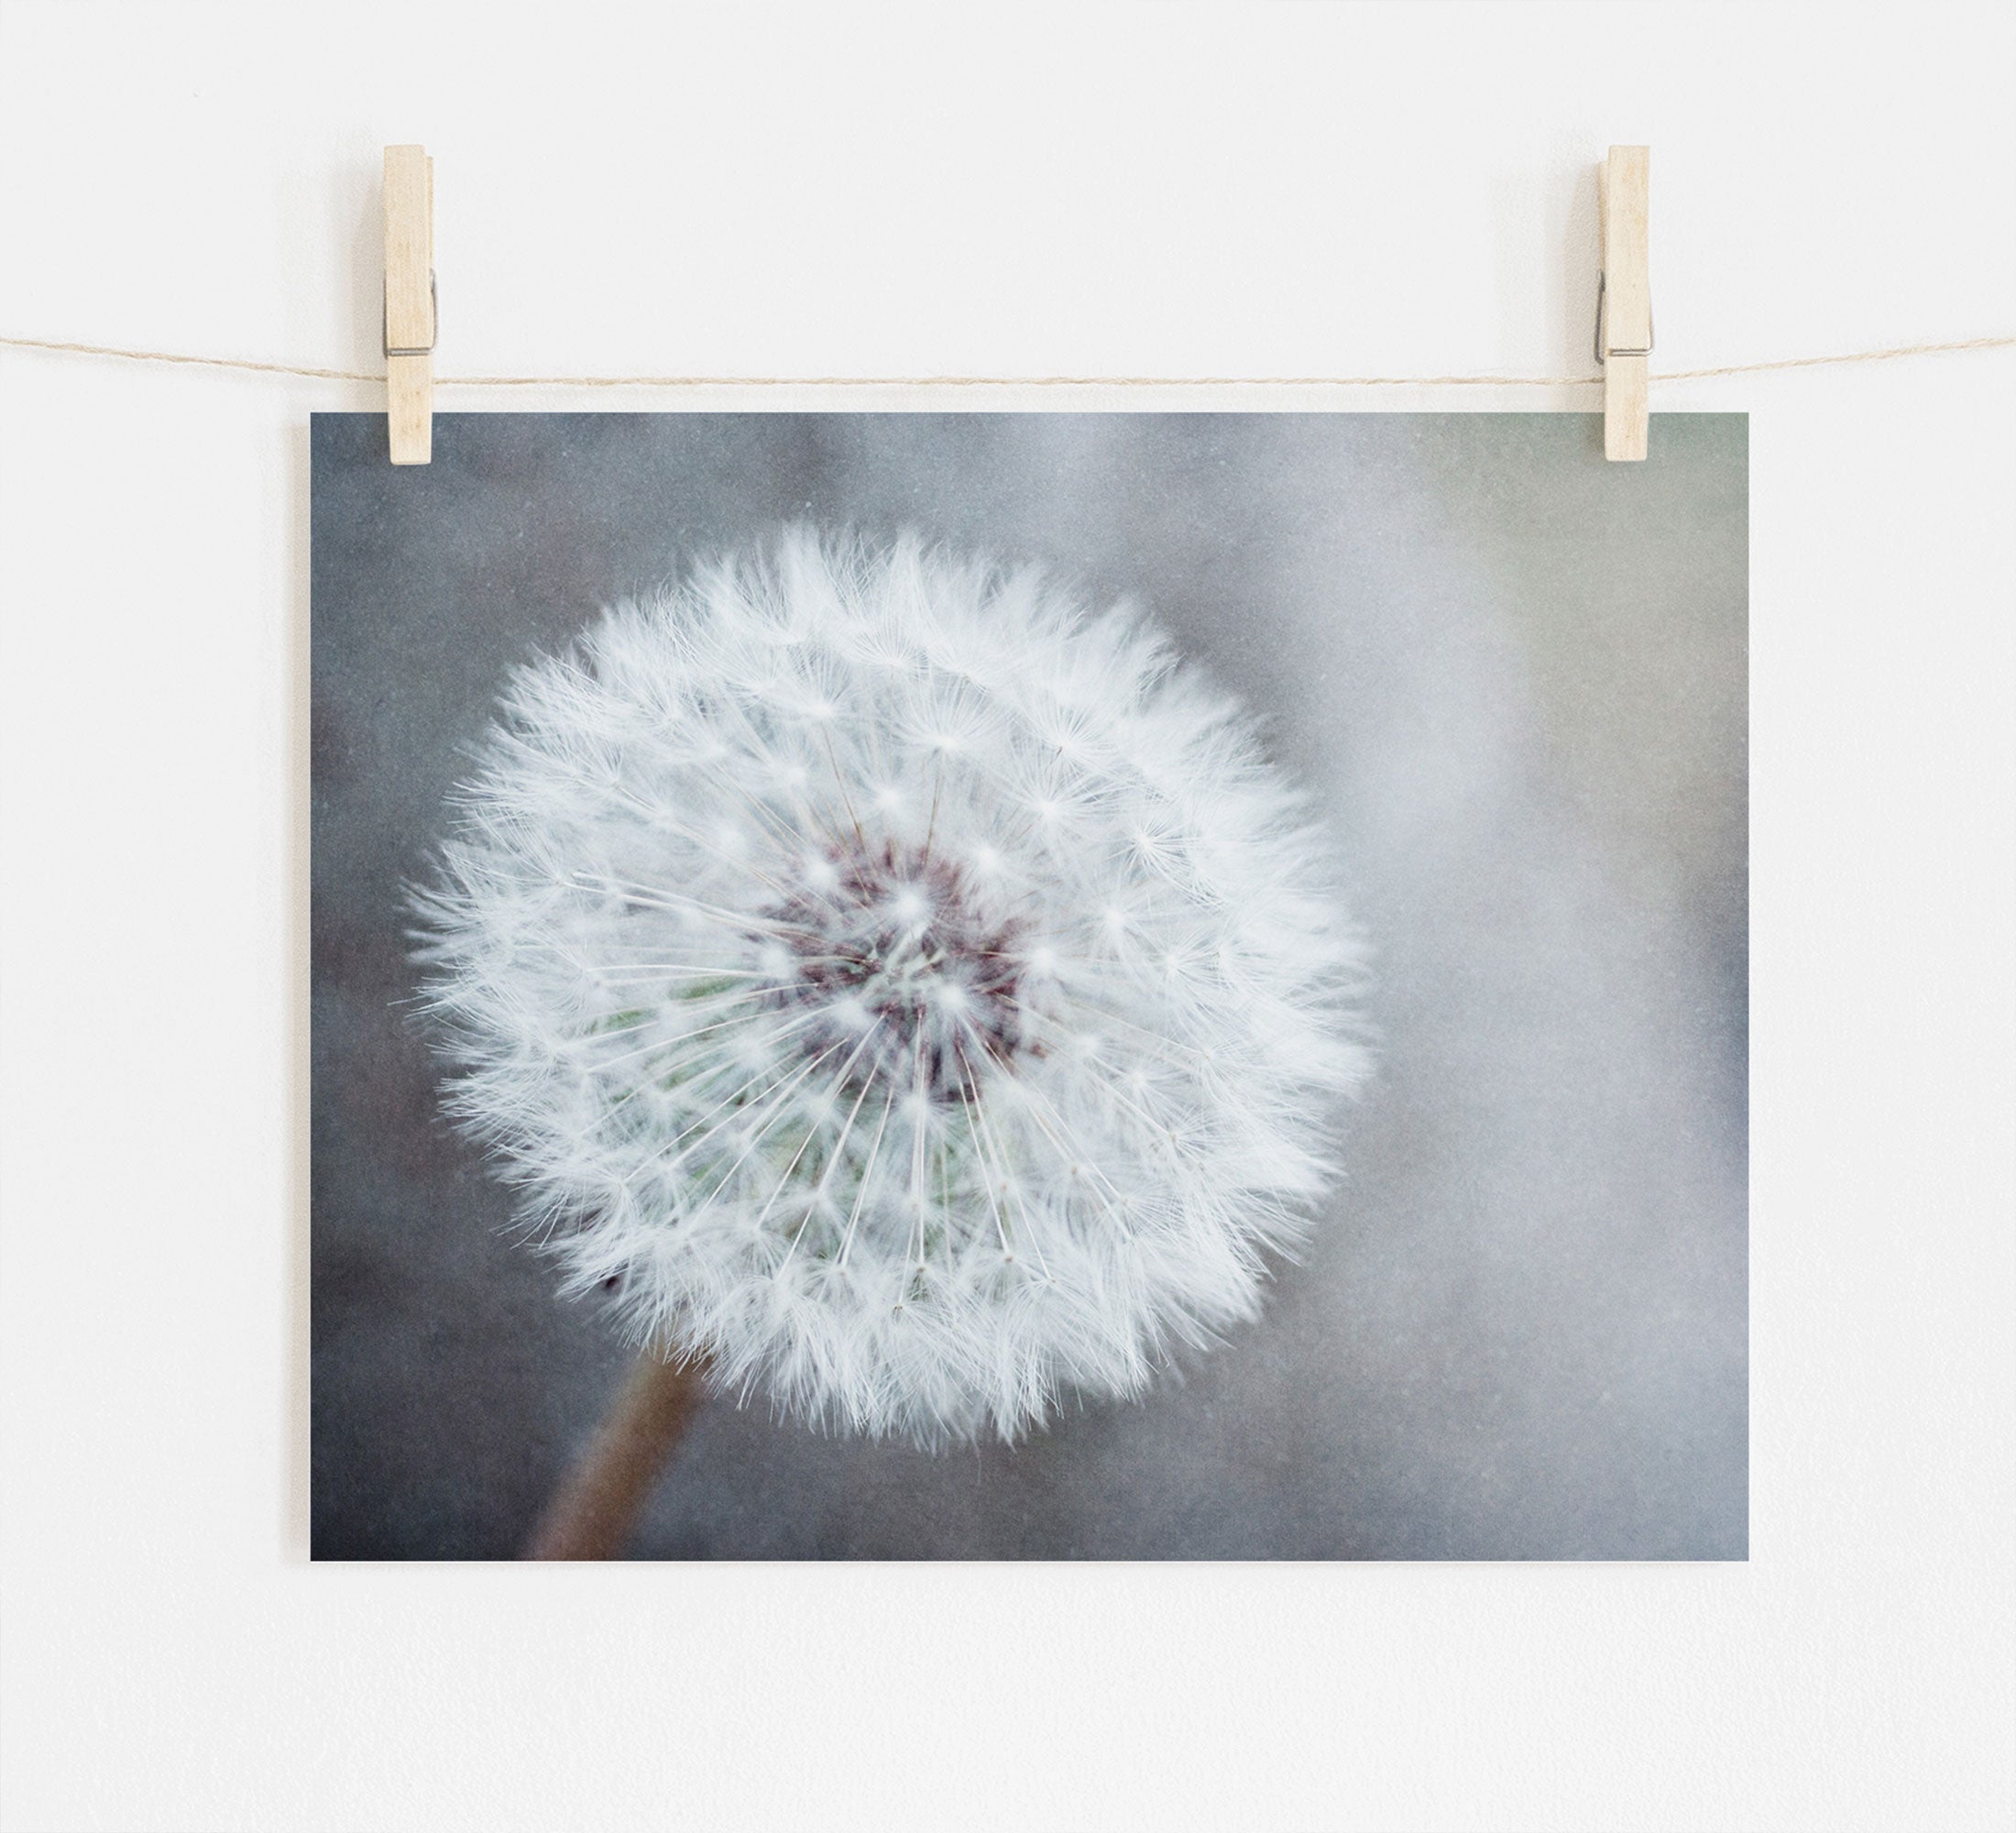 A photo of the Neutral Grey Floral Print, &#39;Dandelion King&#39; by Offley Green, printed on archival photographic paper with a non-glossy lustre finish, and displayed hung by wooden clips on a string against a plain wall.